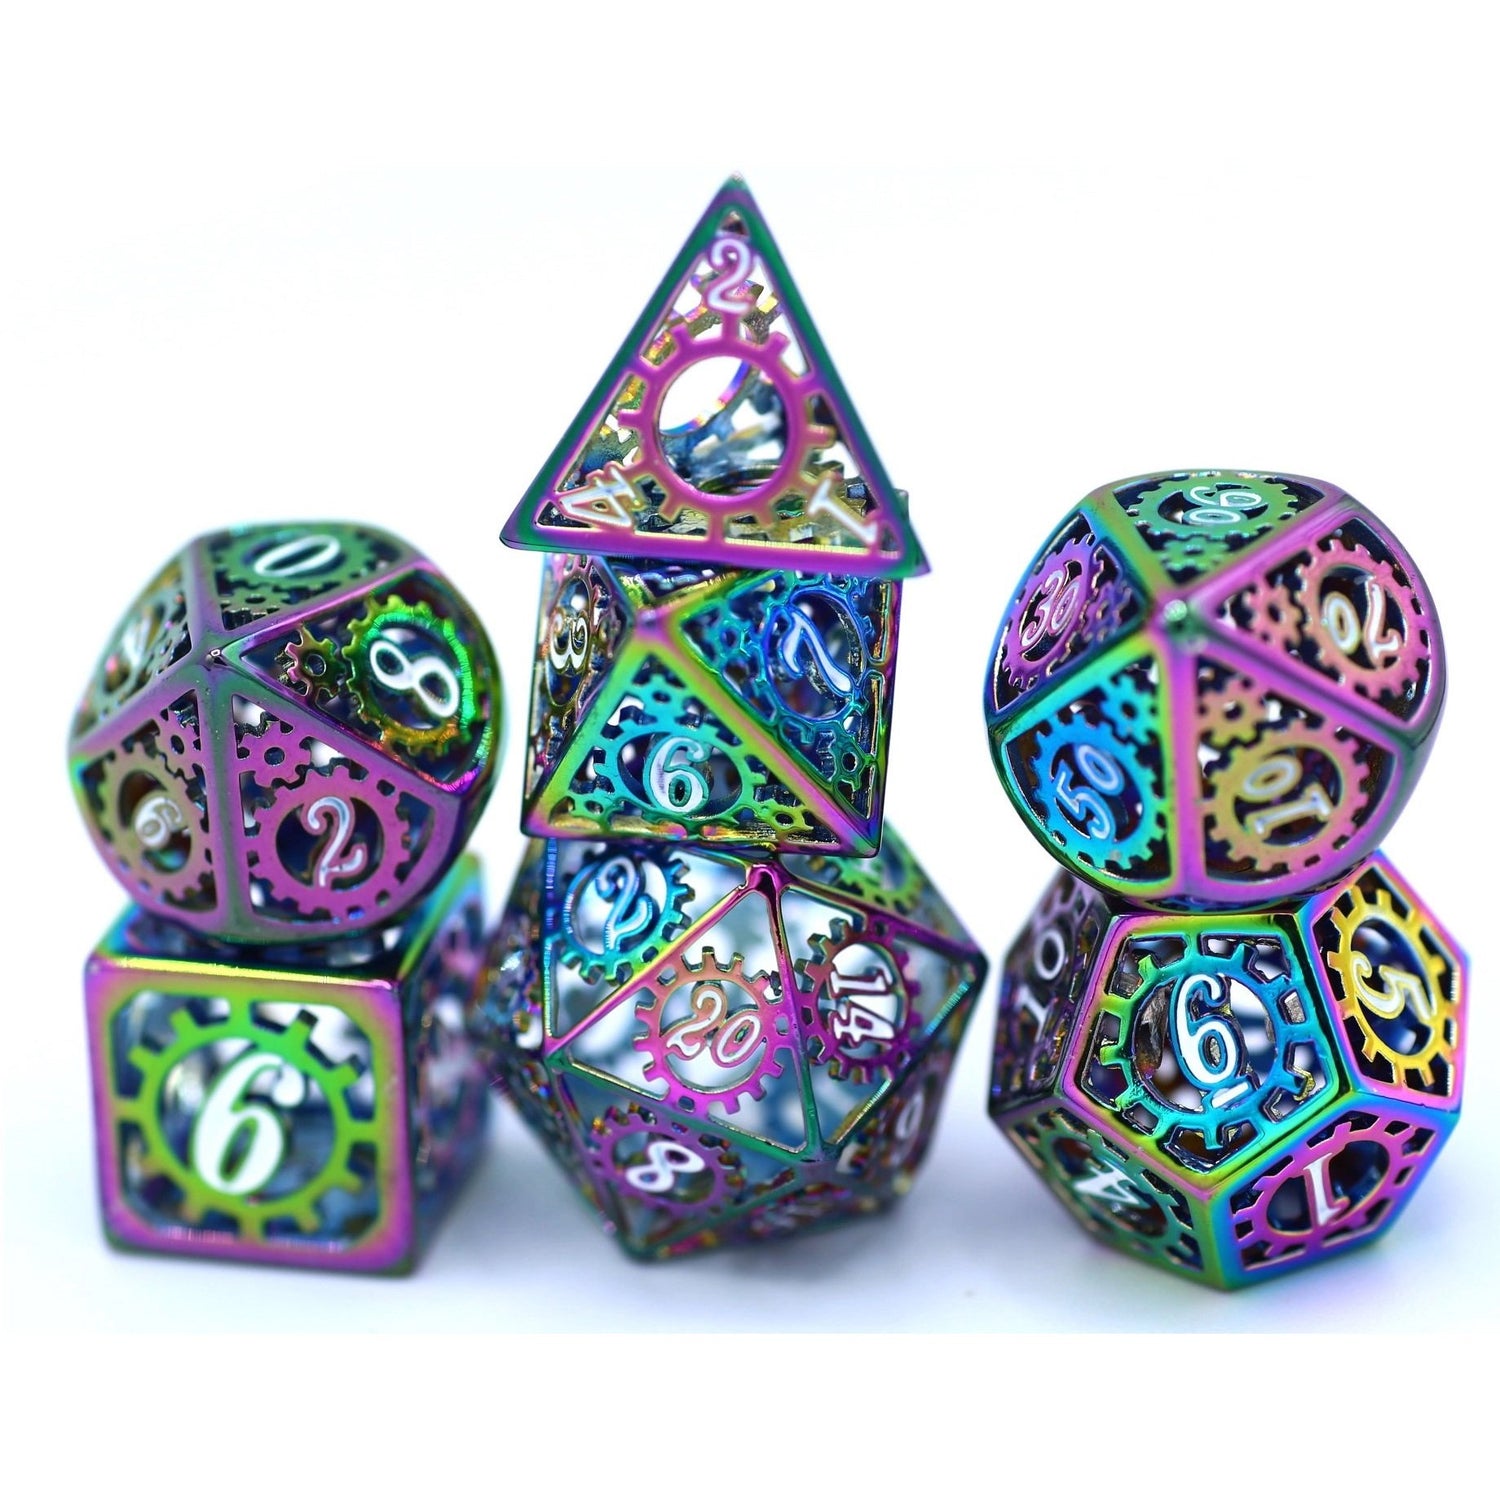 Hollow Metal Gears of Providence Polyhedral Dice Set